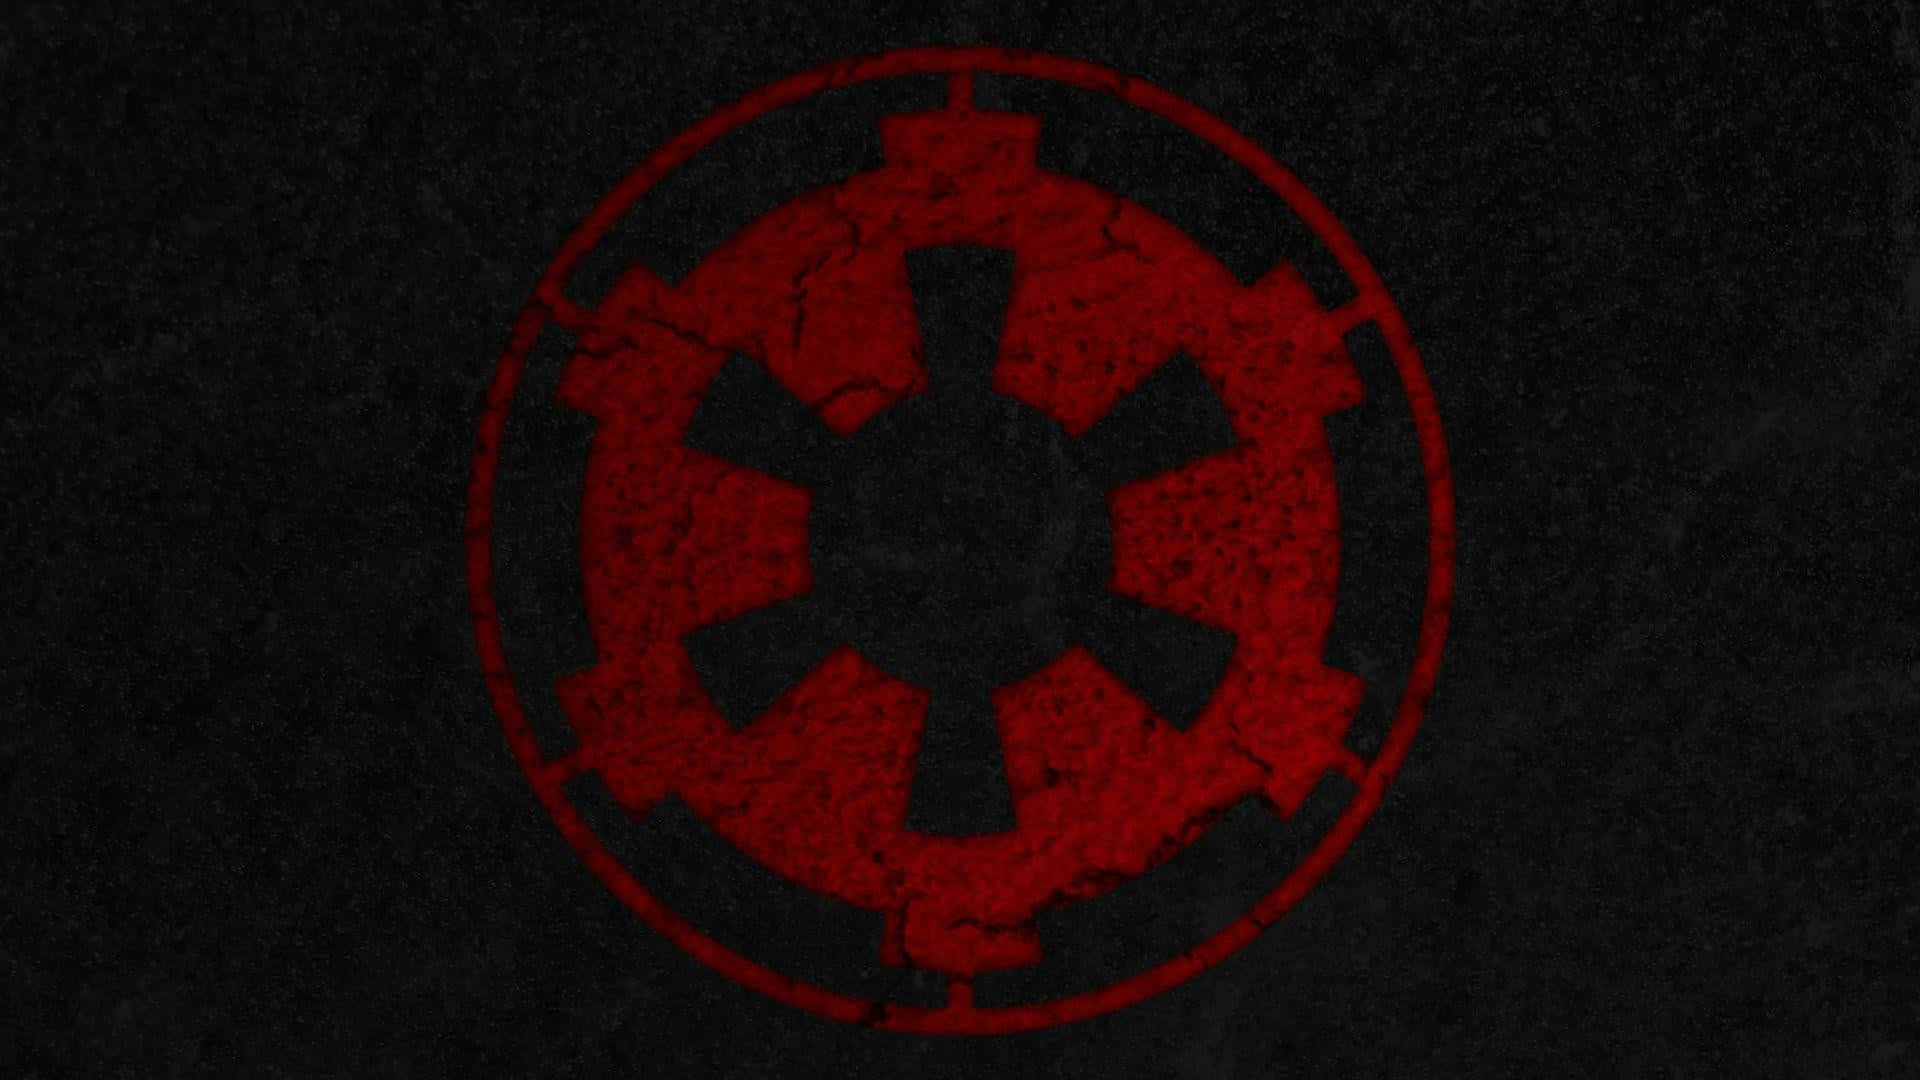 Imperial Logo of The Galactic Empire from Star Wars Wallpaper